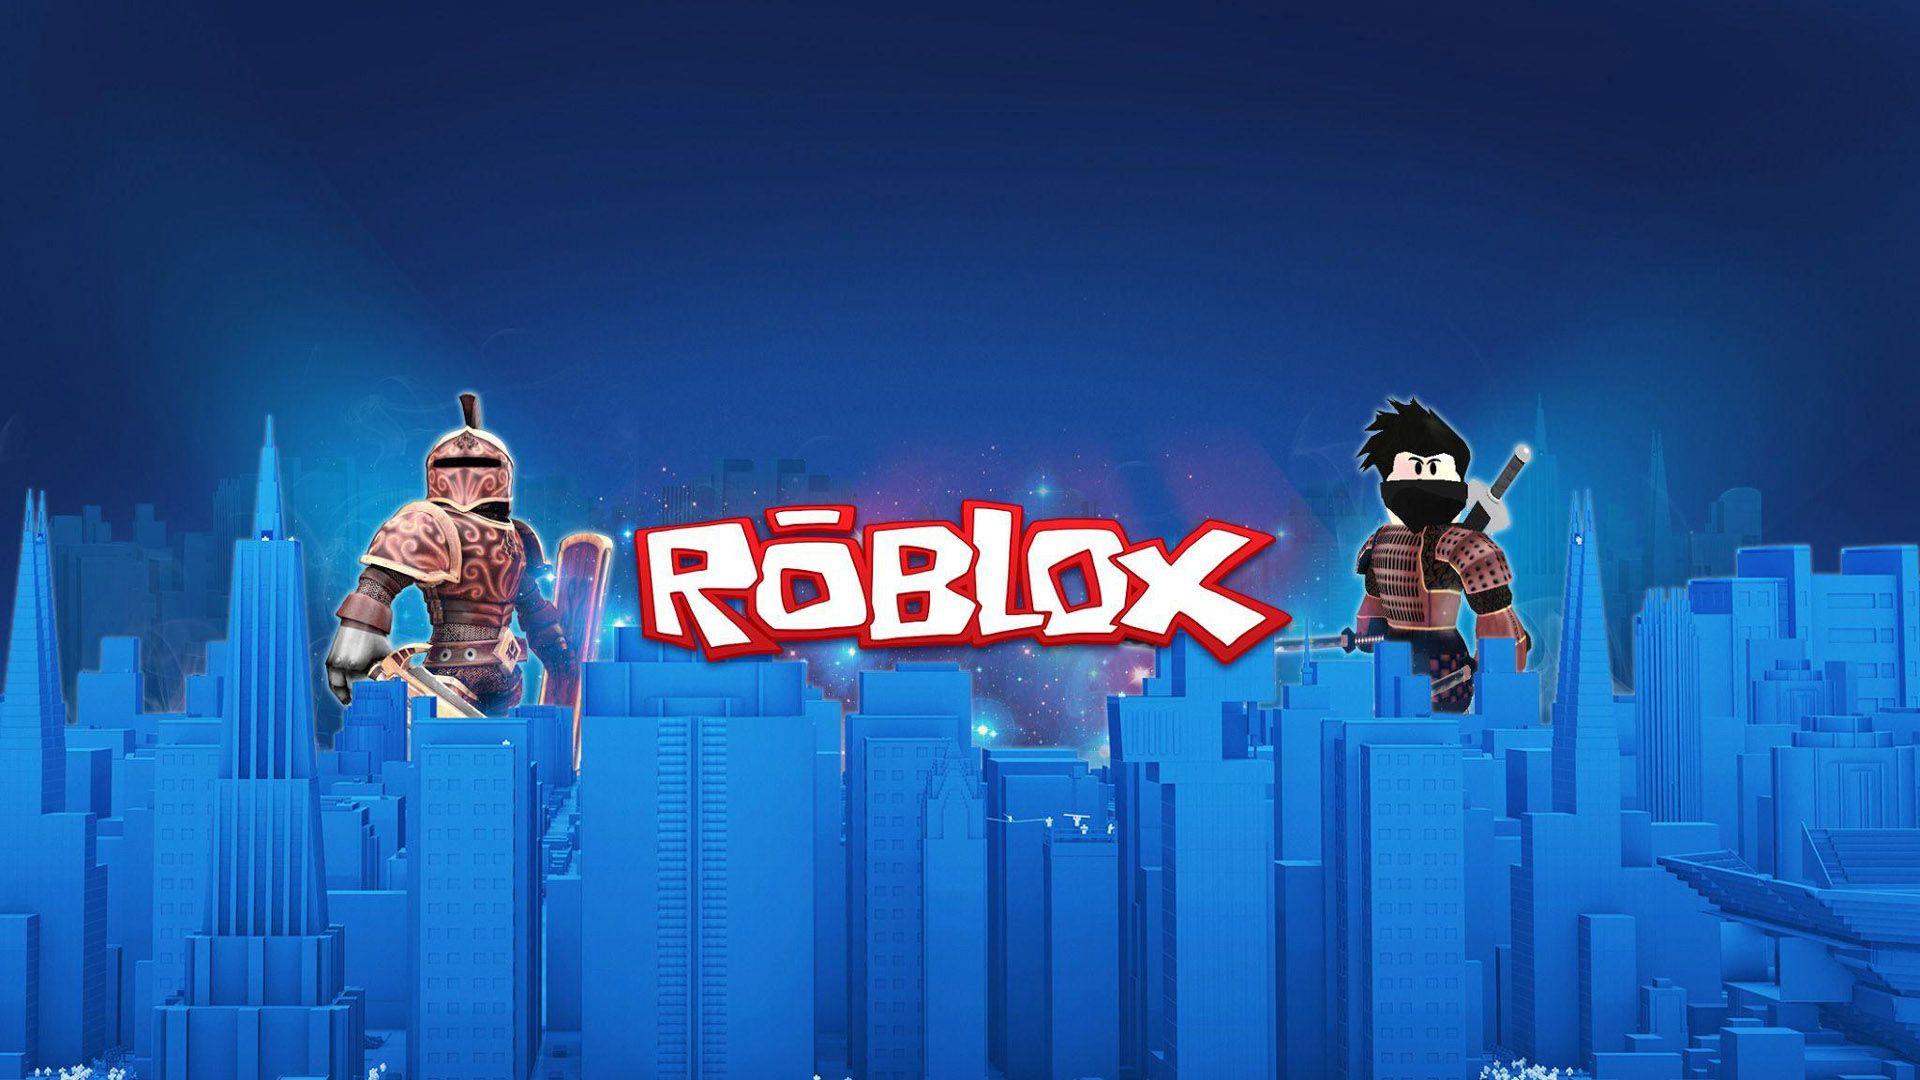 Roblox Characters Wallpapers Top Free Roblox Characters Backgrounds Wallpaperaccess - roblox characters images with backgrounds